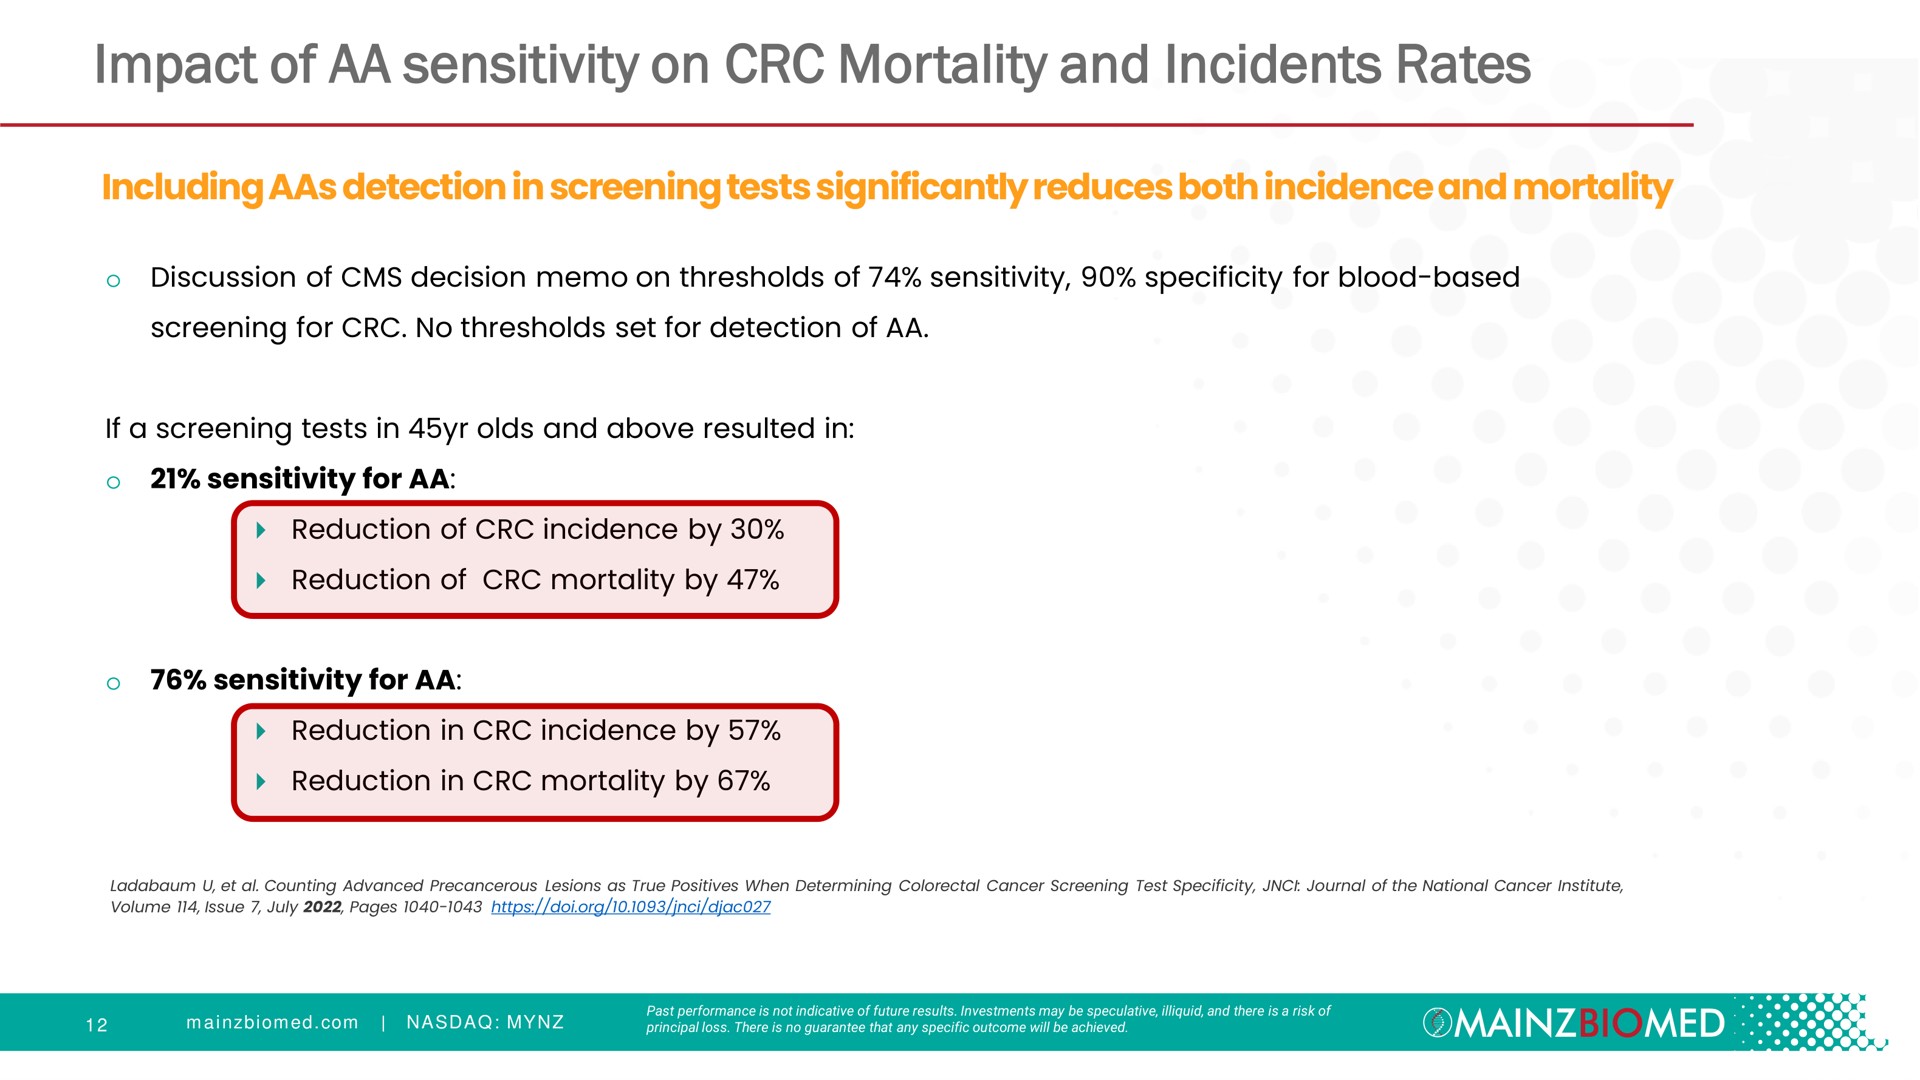 impact of sensitivity on mortality and incidents rates including aas detection in screening tests significantly reduces both incidence | Mainz Biomed NV